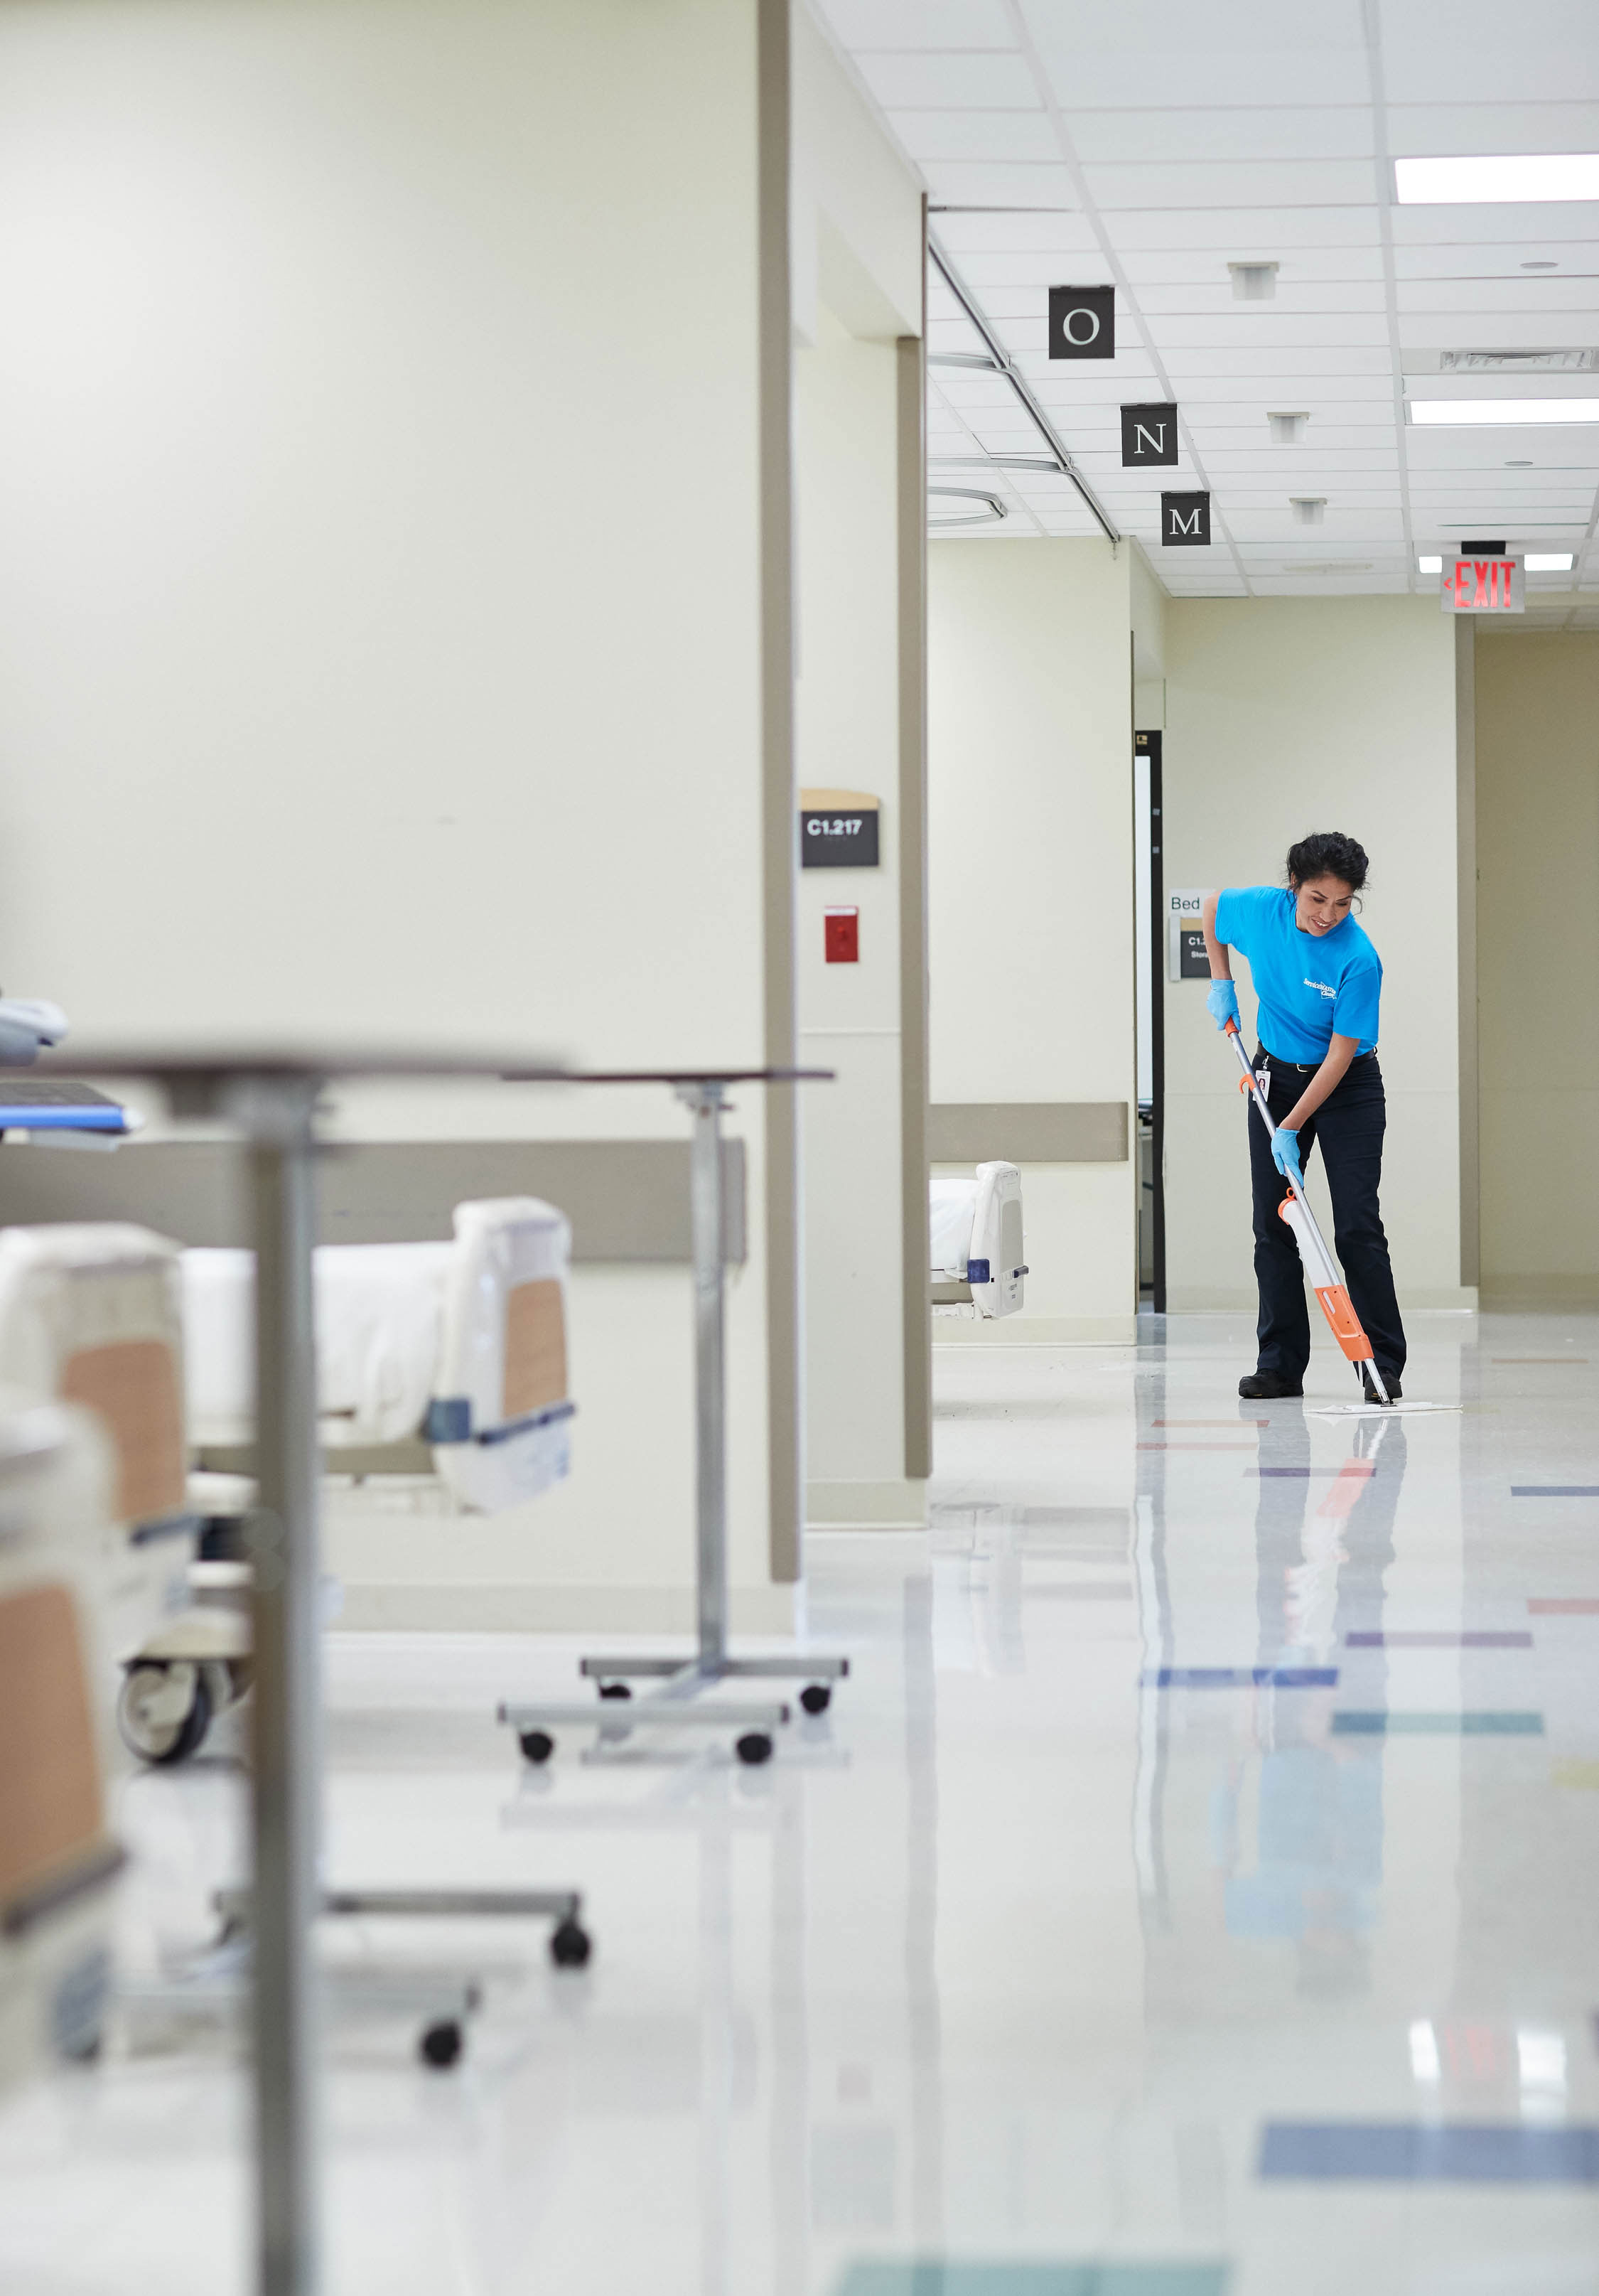 Maintain a Clean and Safe Medical Environment with Our Disposable